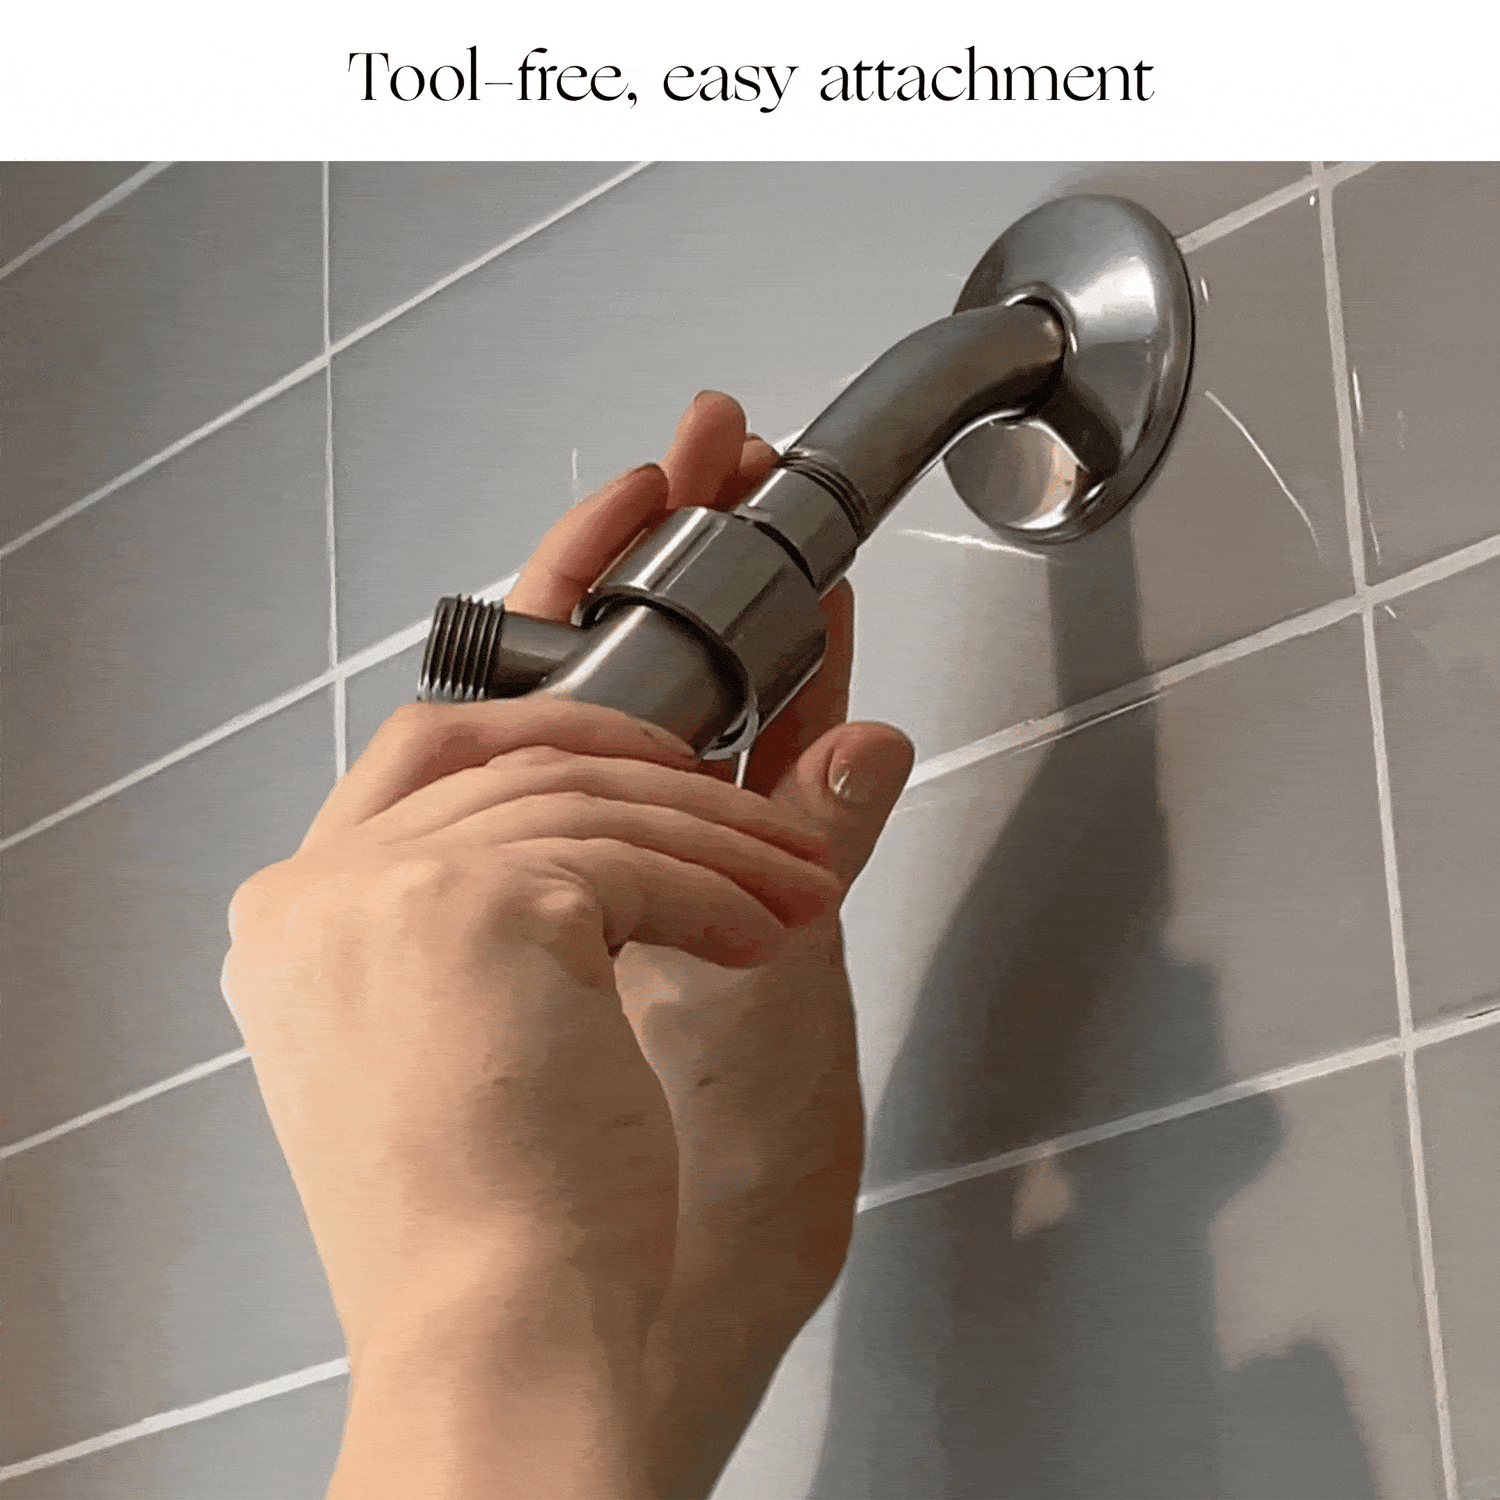 Handheld Filtered Showerhead | Lifestyle, Tool-free, easy attachment